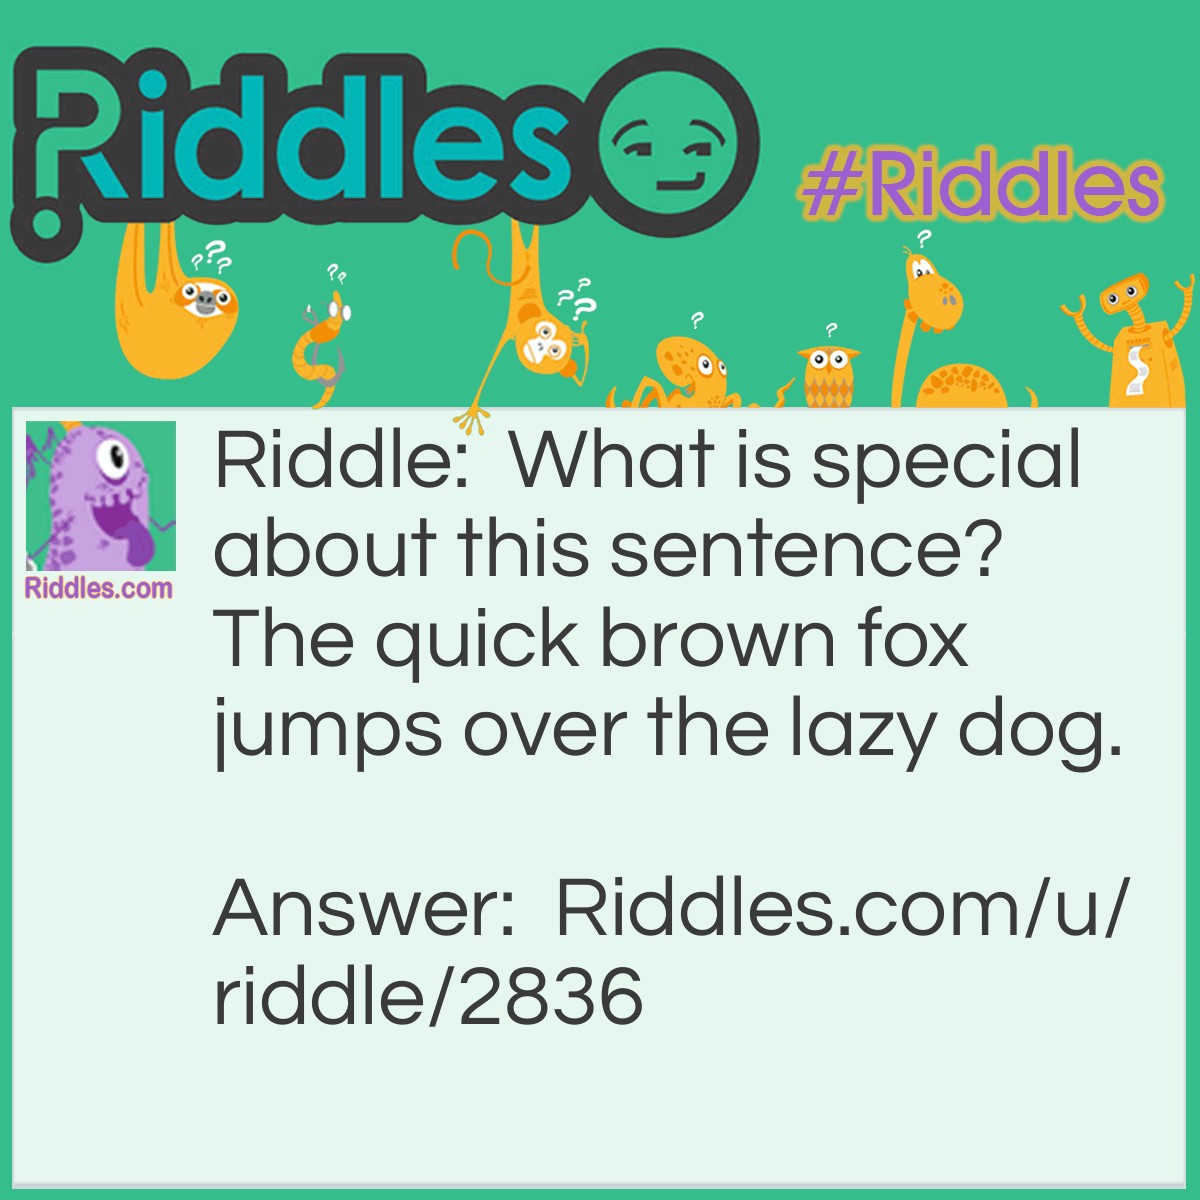 Riddle: What is special about this sentence? The quick brown fox jumps over the lazy dog. Answer: The sentence includes every letter in the English alphabet.